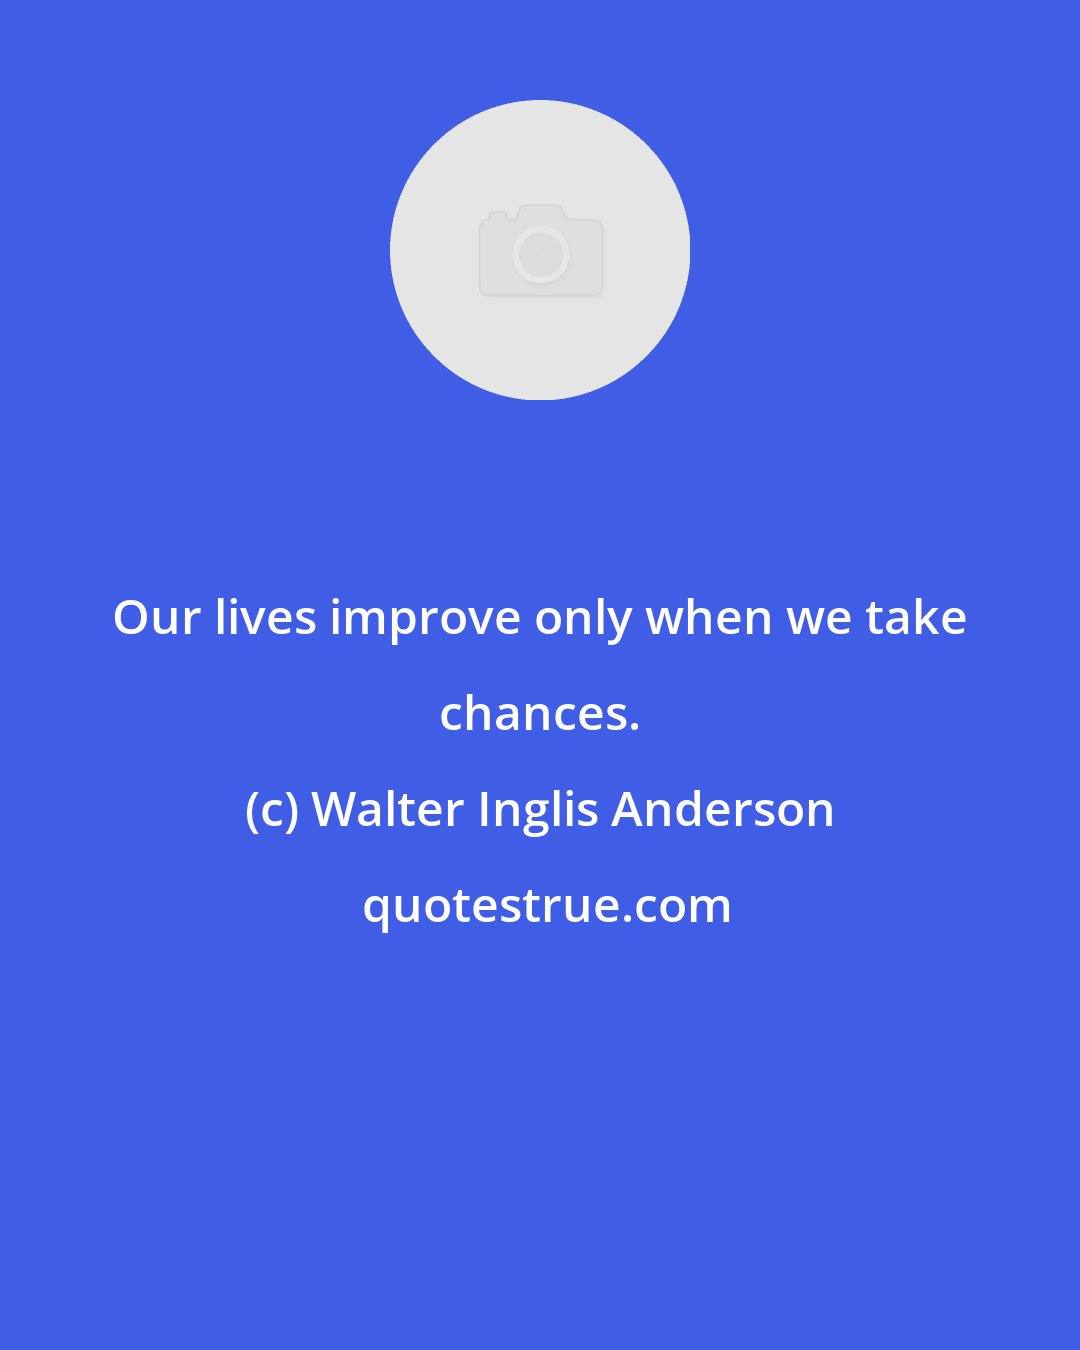 Walter Inglis Anderson: Our lives improve only when we take chances.